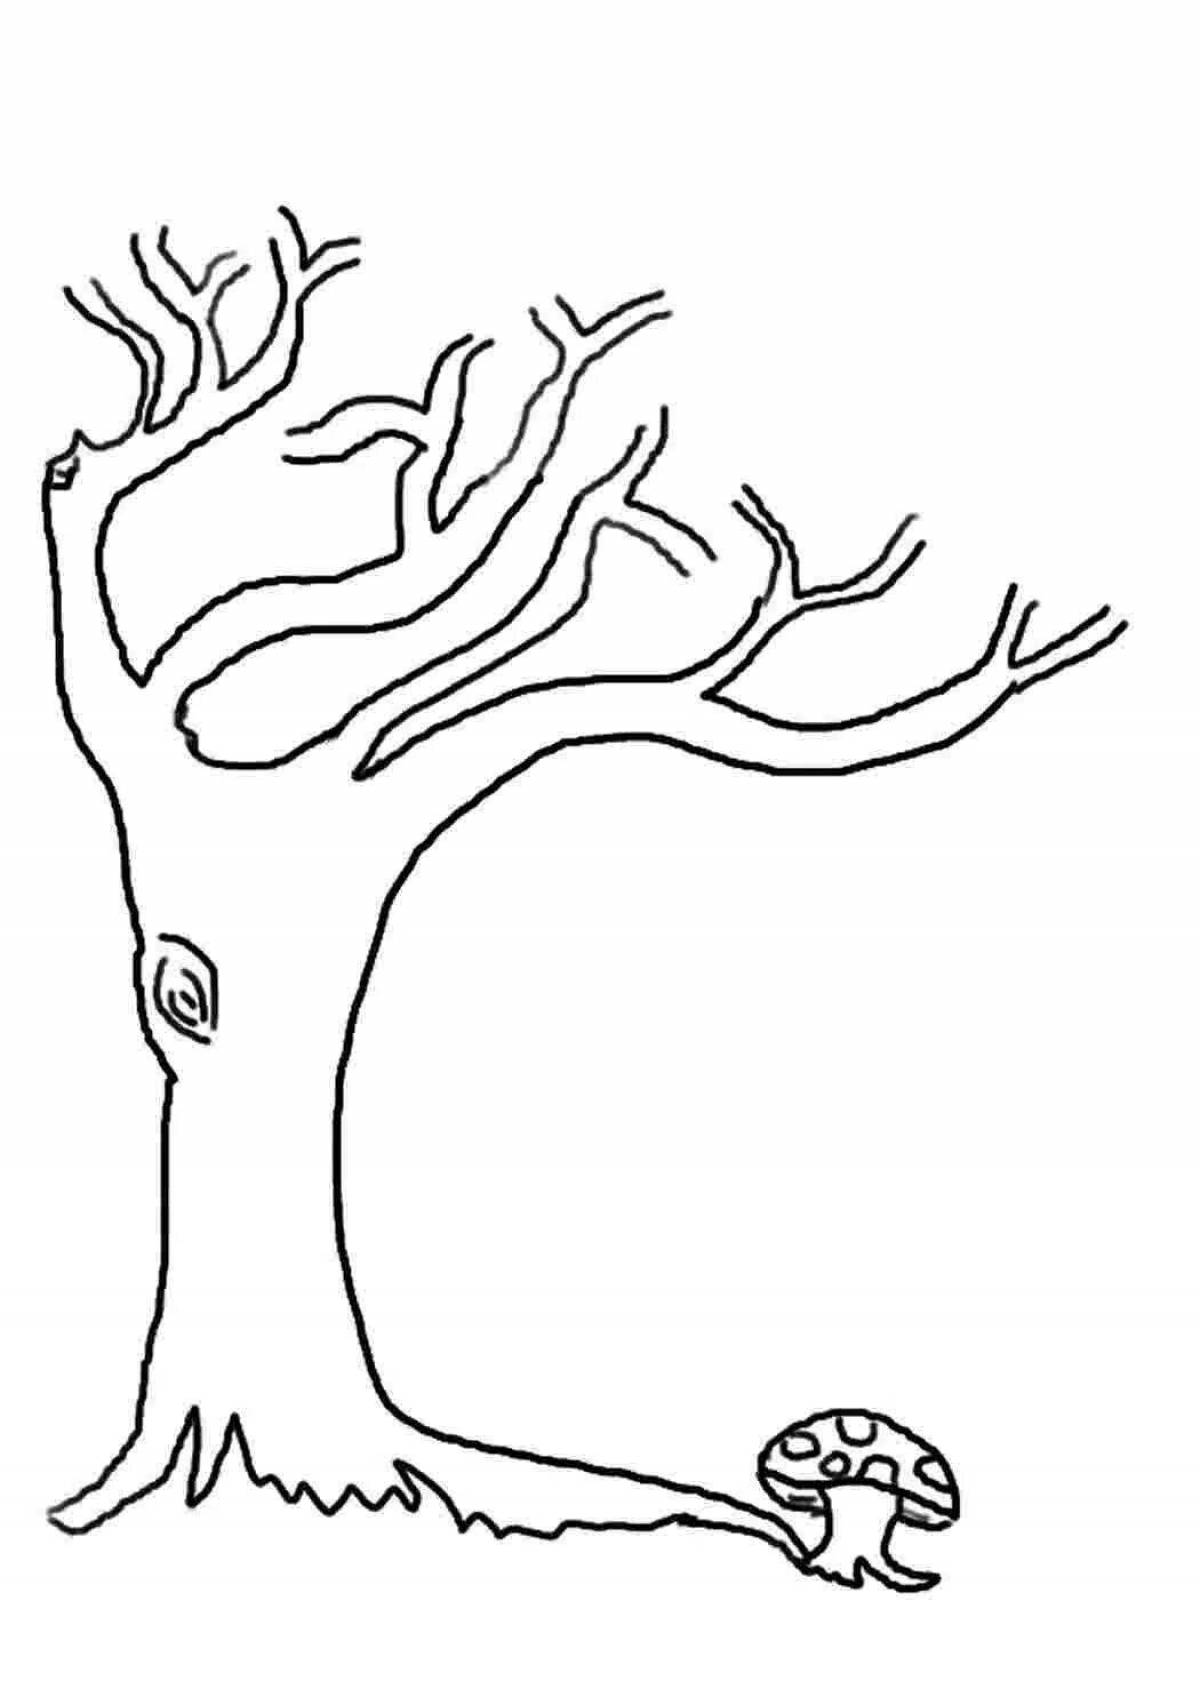 Coloring book with amazing tree silhouette